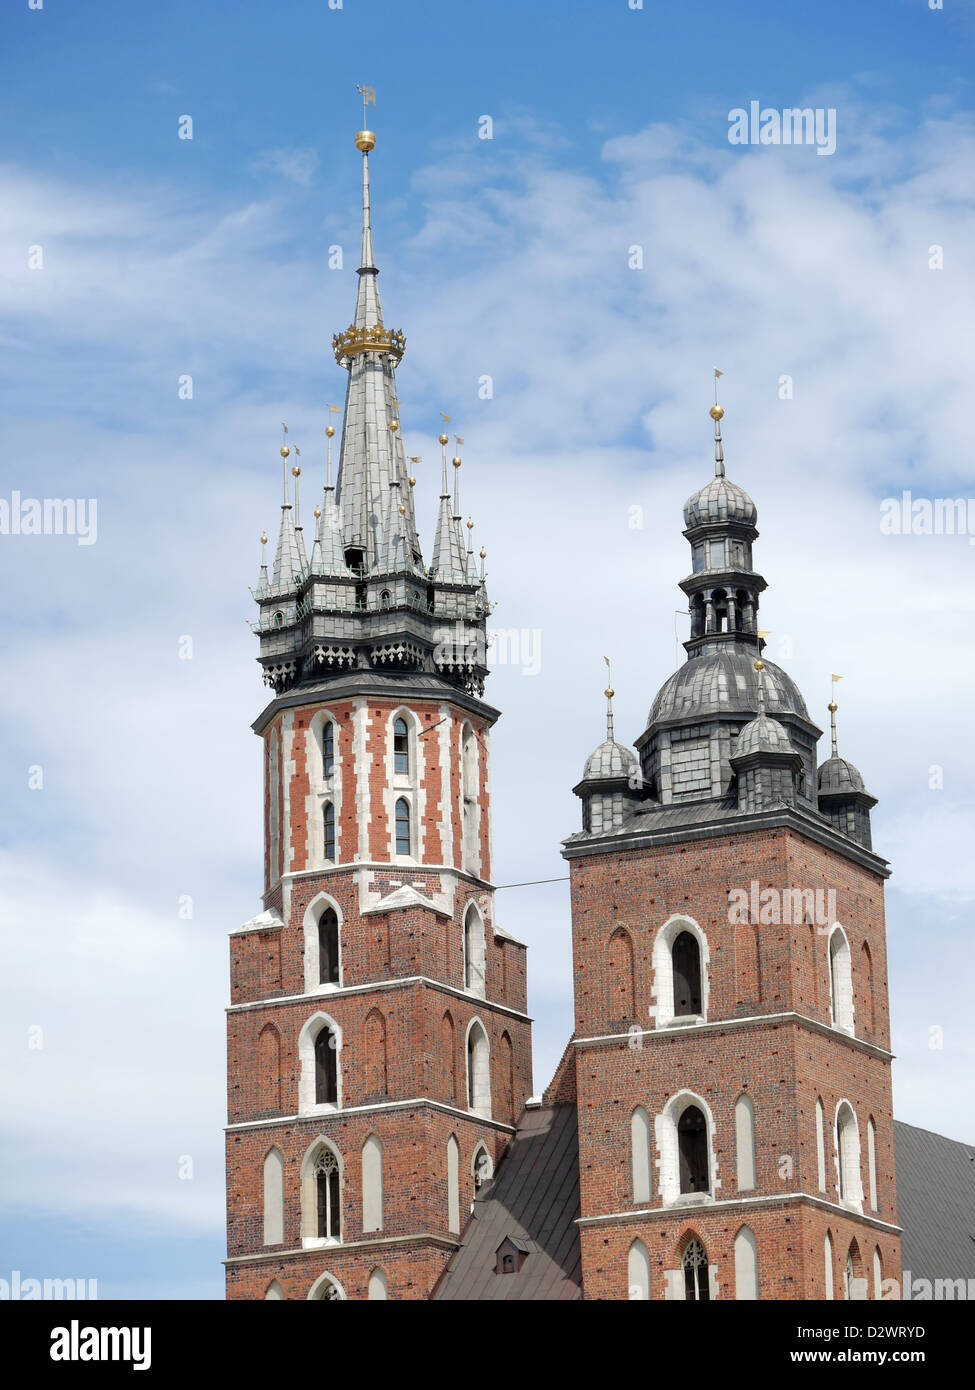 Closeup of St Mary's church twin towers, gothic basilica in Krakow, Poland Stock Photo